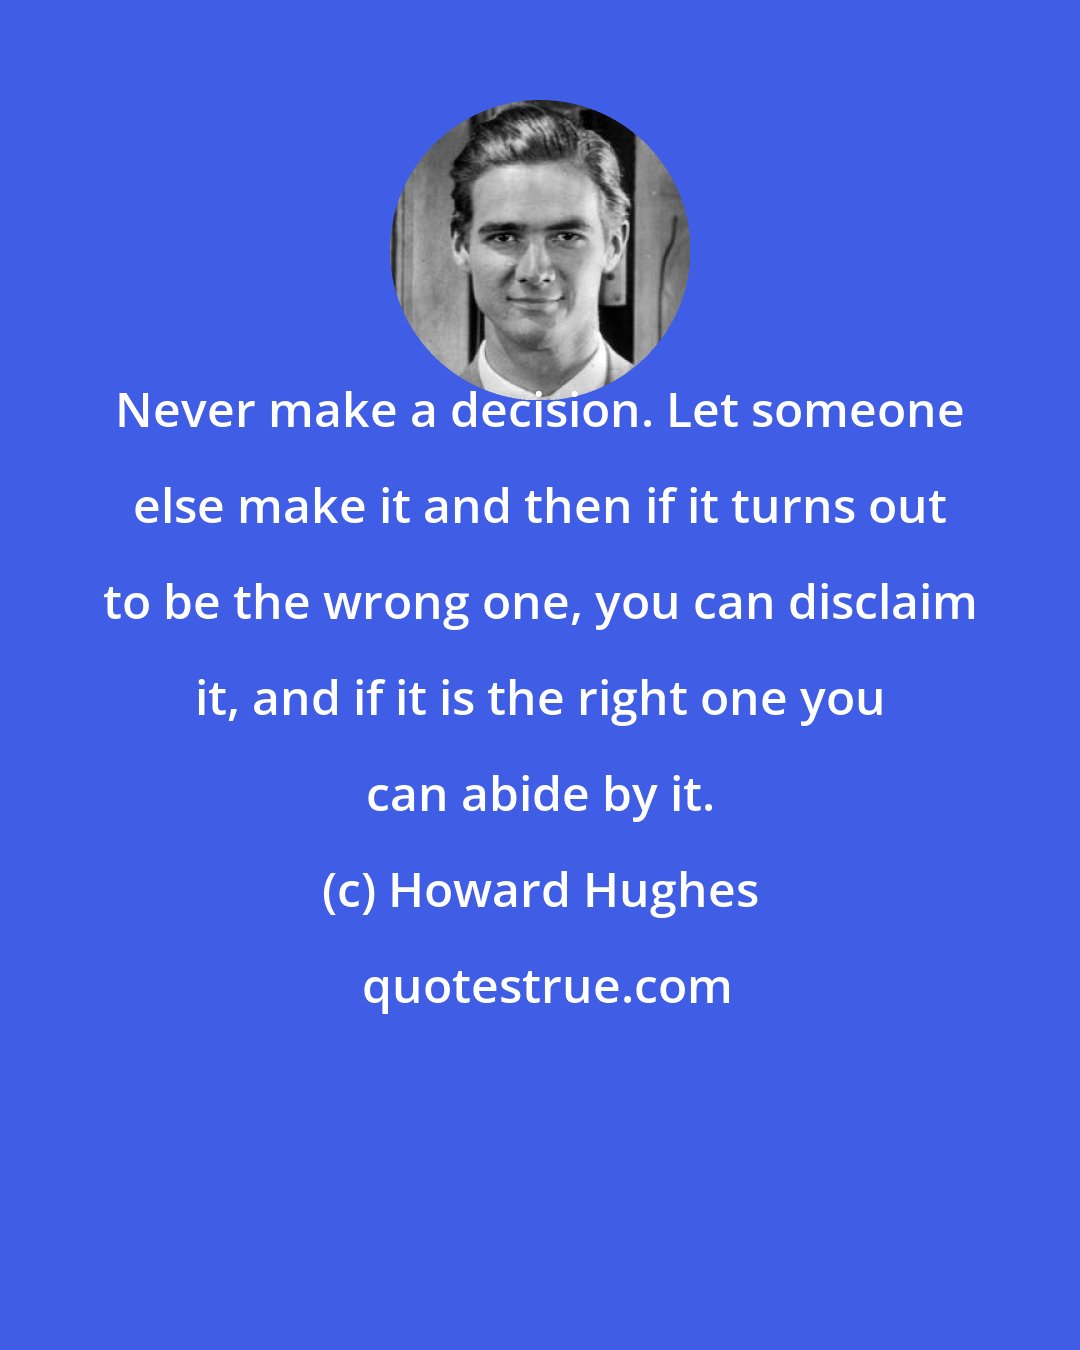 Howard Hughes: Never make a decision. Let someone else make it and then if it turns out to be the wrong one, you can disclaim it, and if it is the right one you can abide by it.